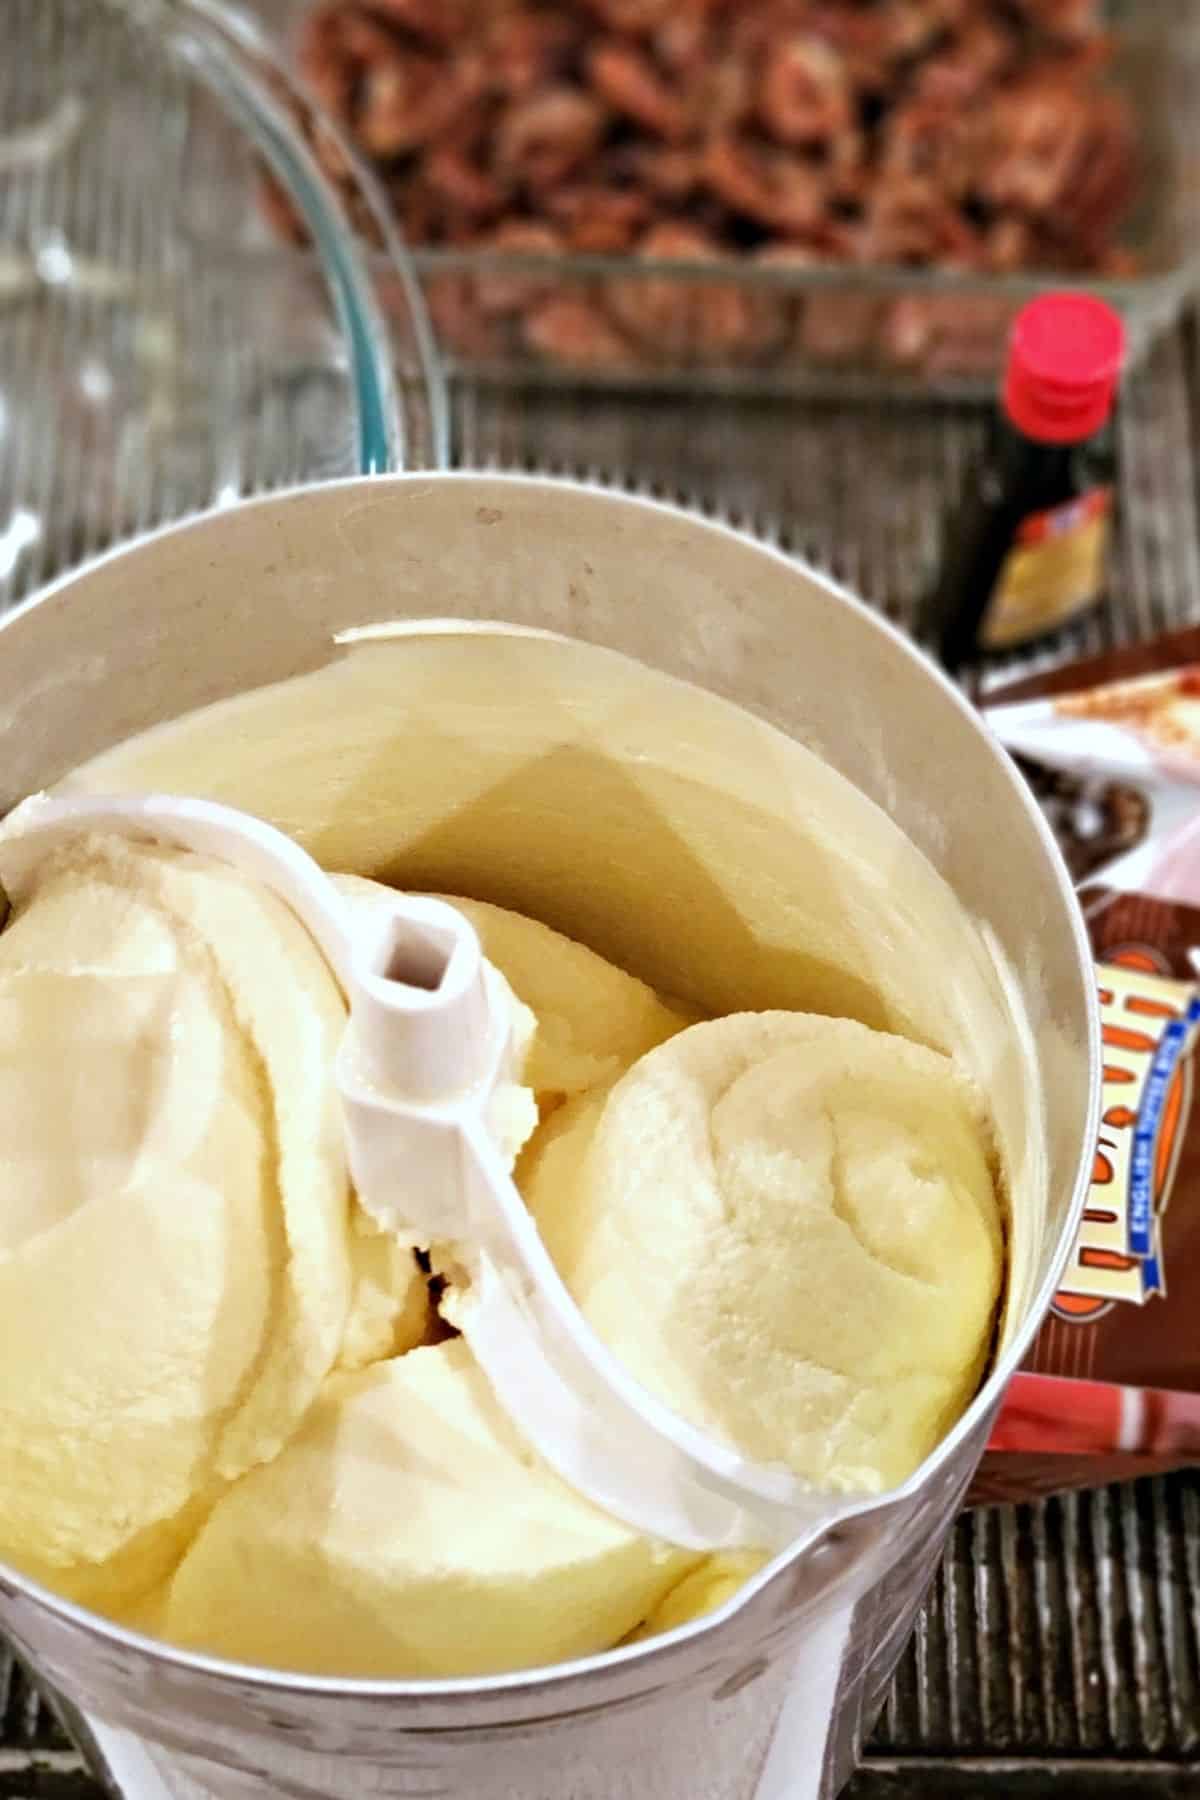 Ice cream being churned in an ice cream mixer.